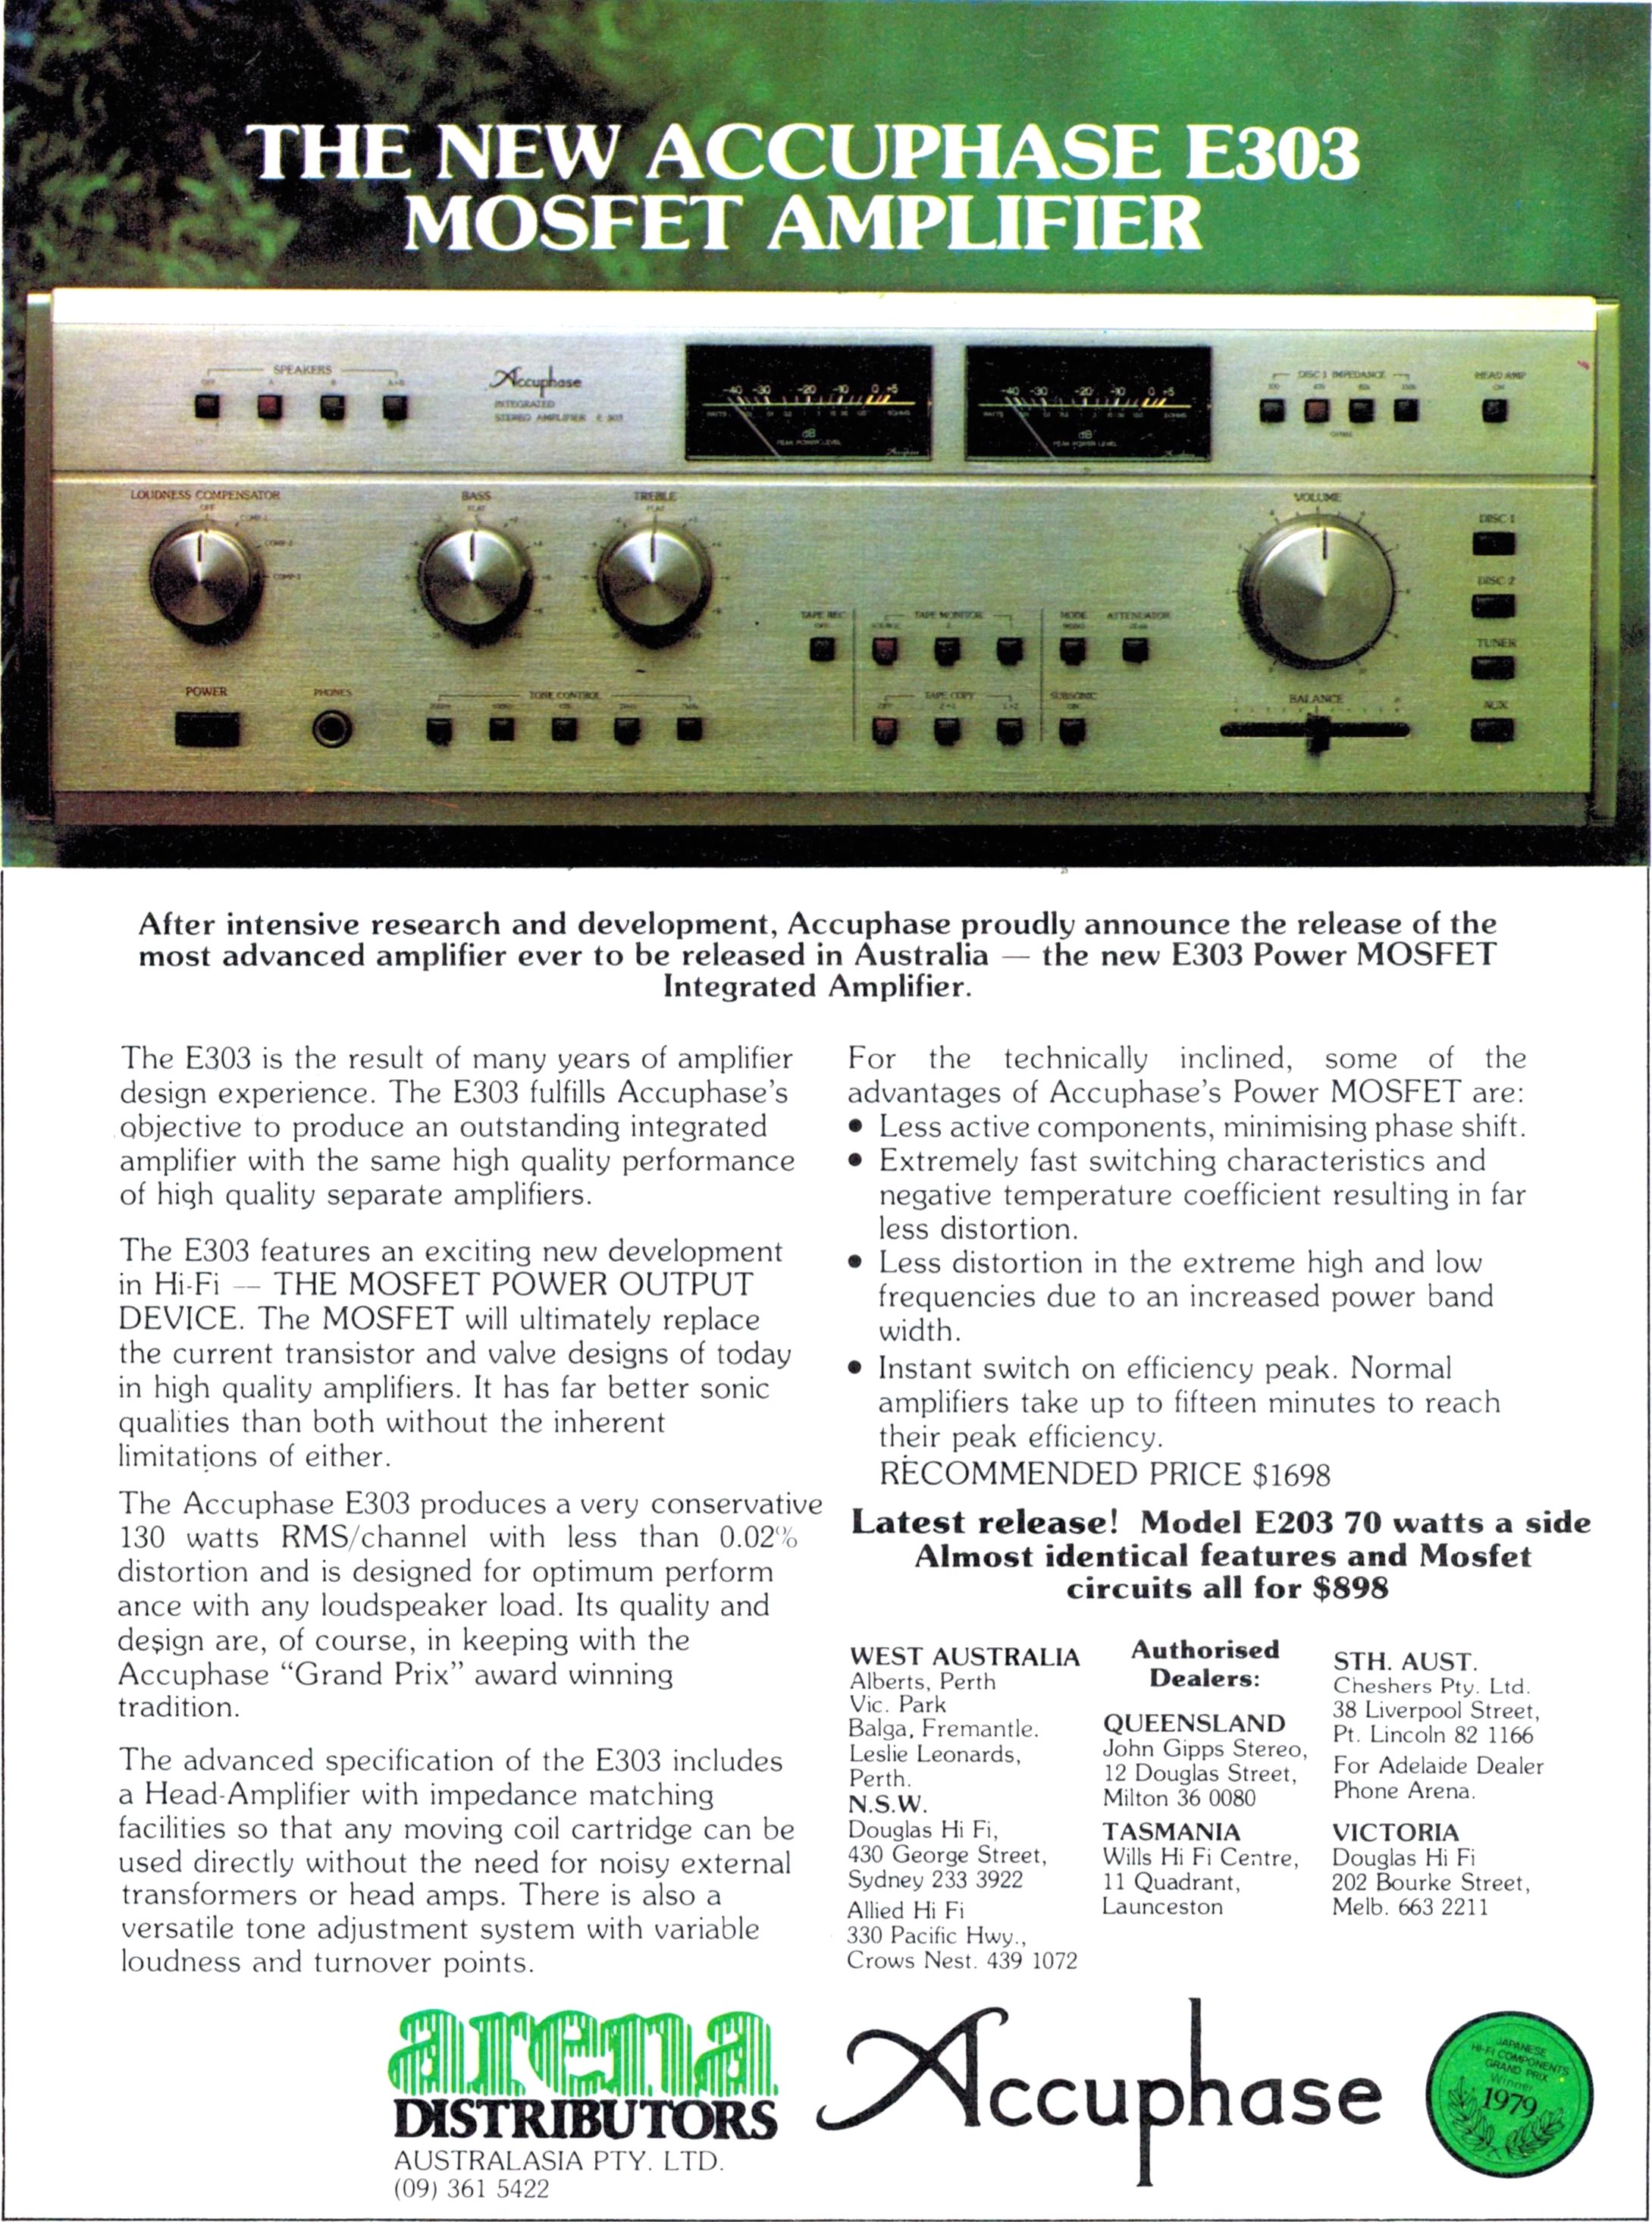 Accuphase 1980 91.jpg